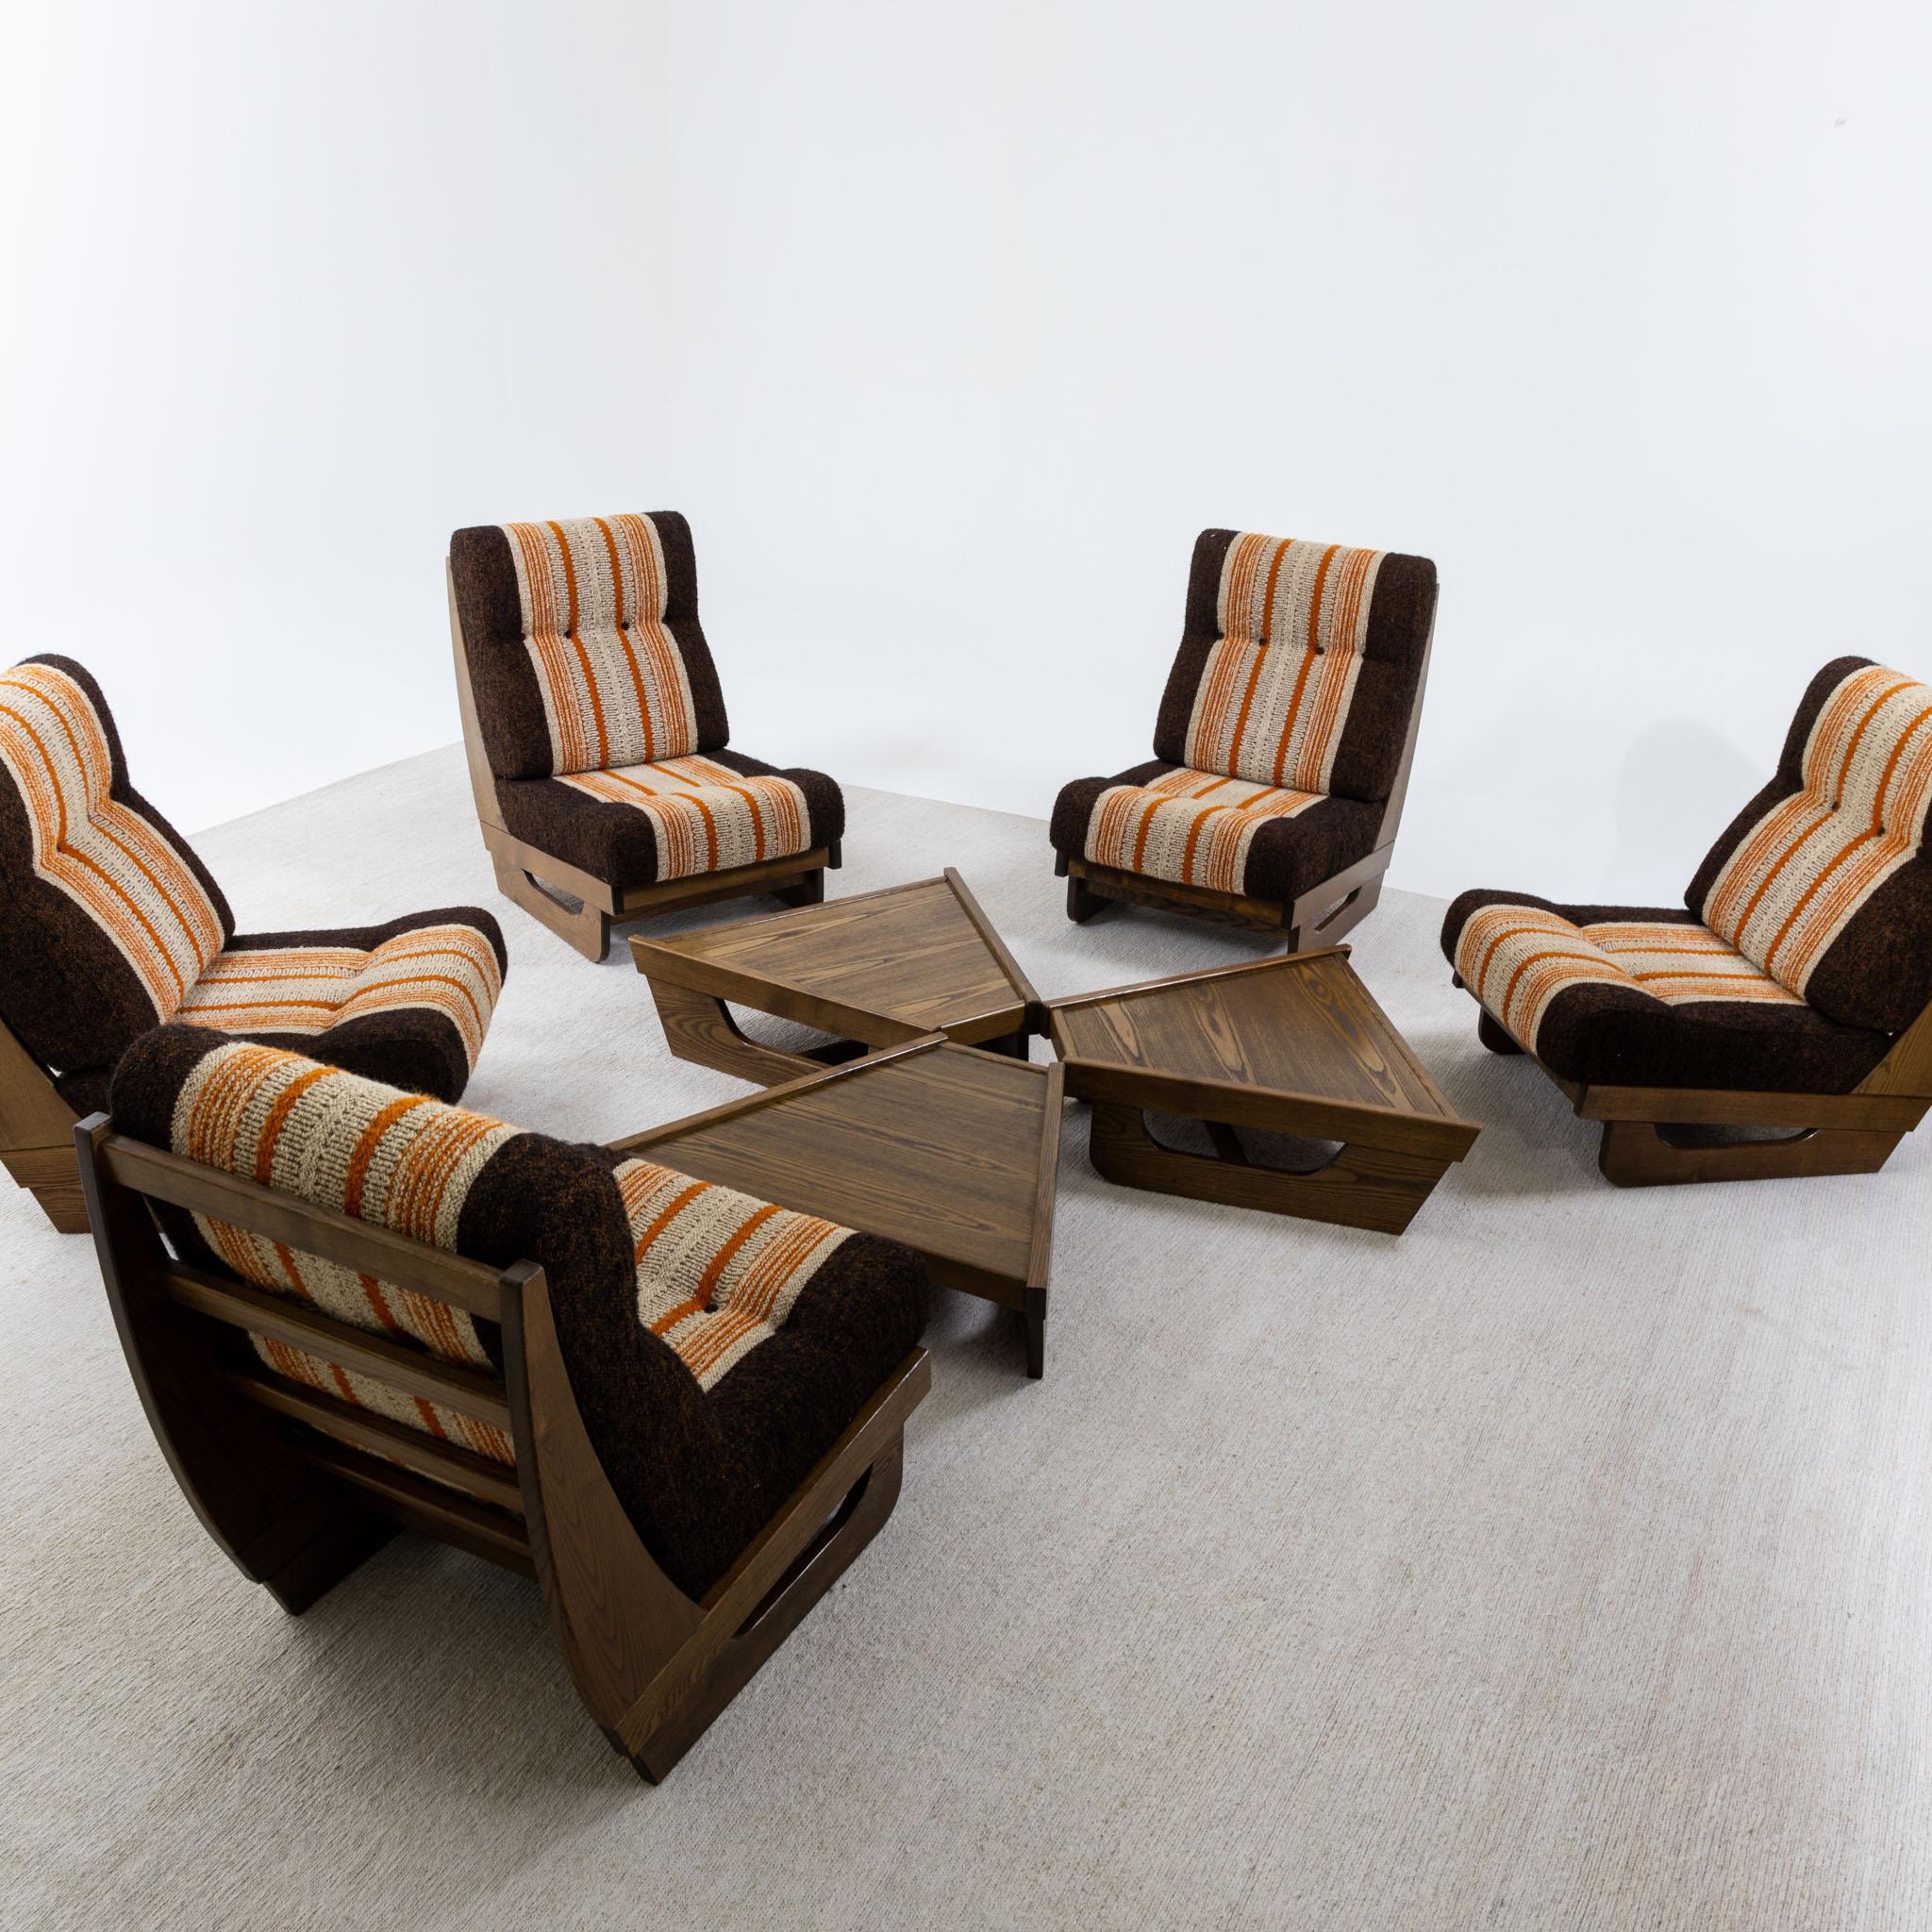 Modular seating group with five lounge chairs and three tables made of wood. The combination can be varied at will. Due to the trapezoidal shape of the coffee tables, the group can also be arranged in a semicircle. The original seat cushions with